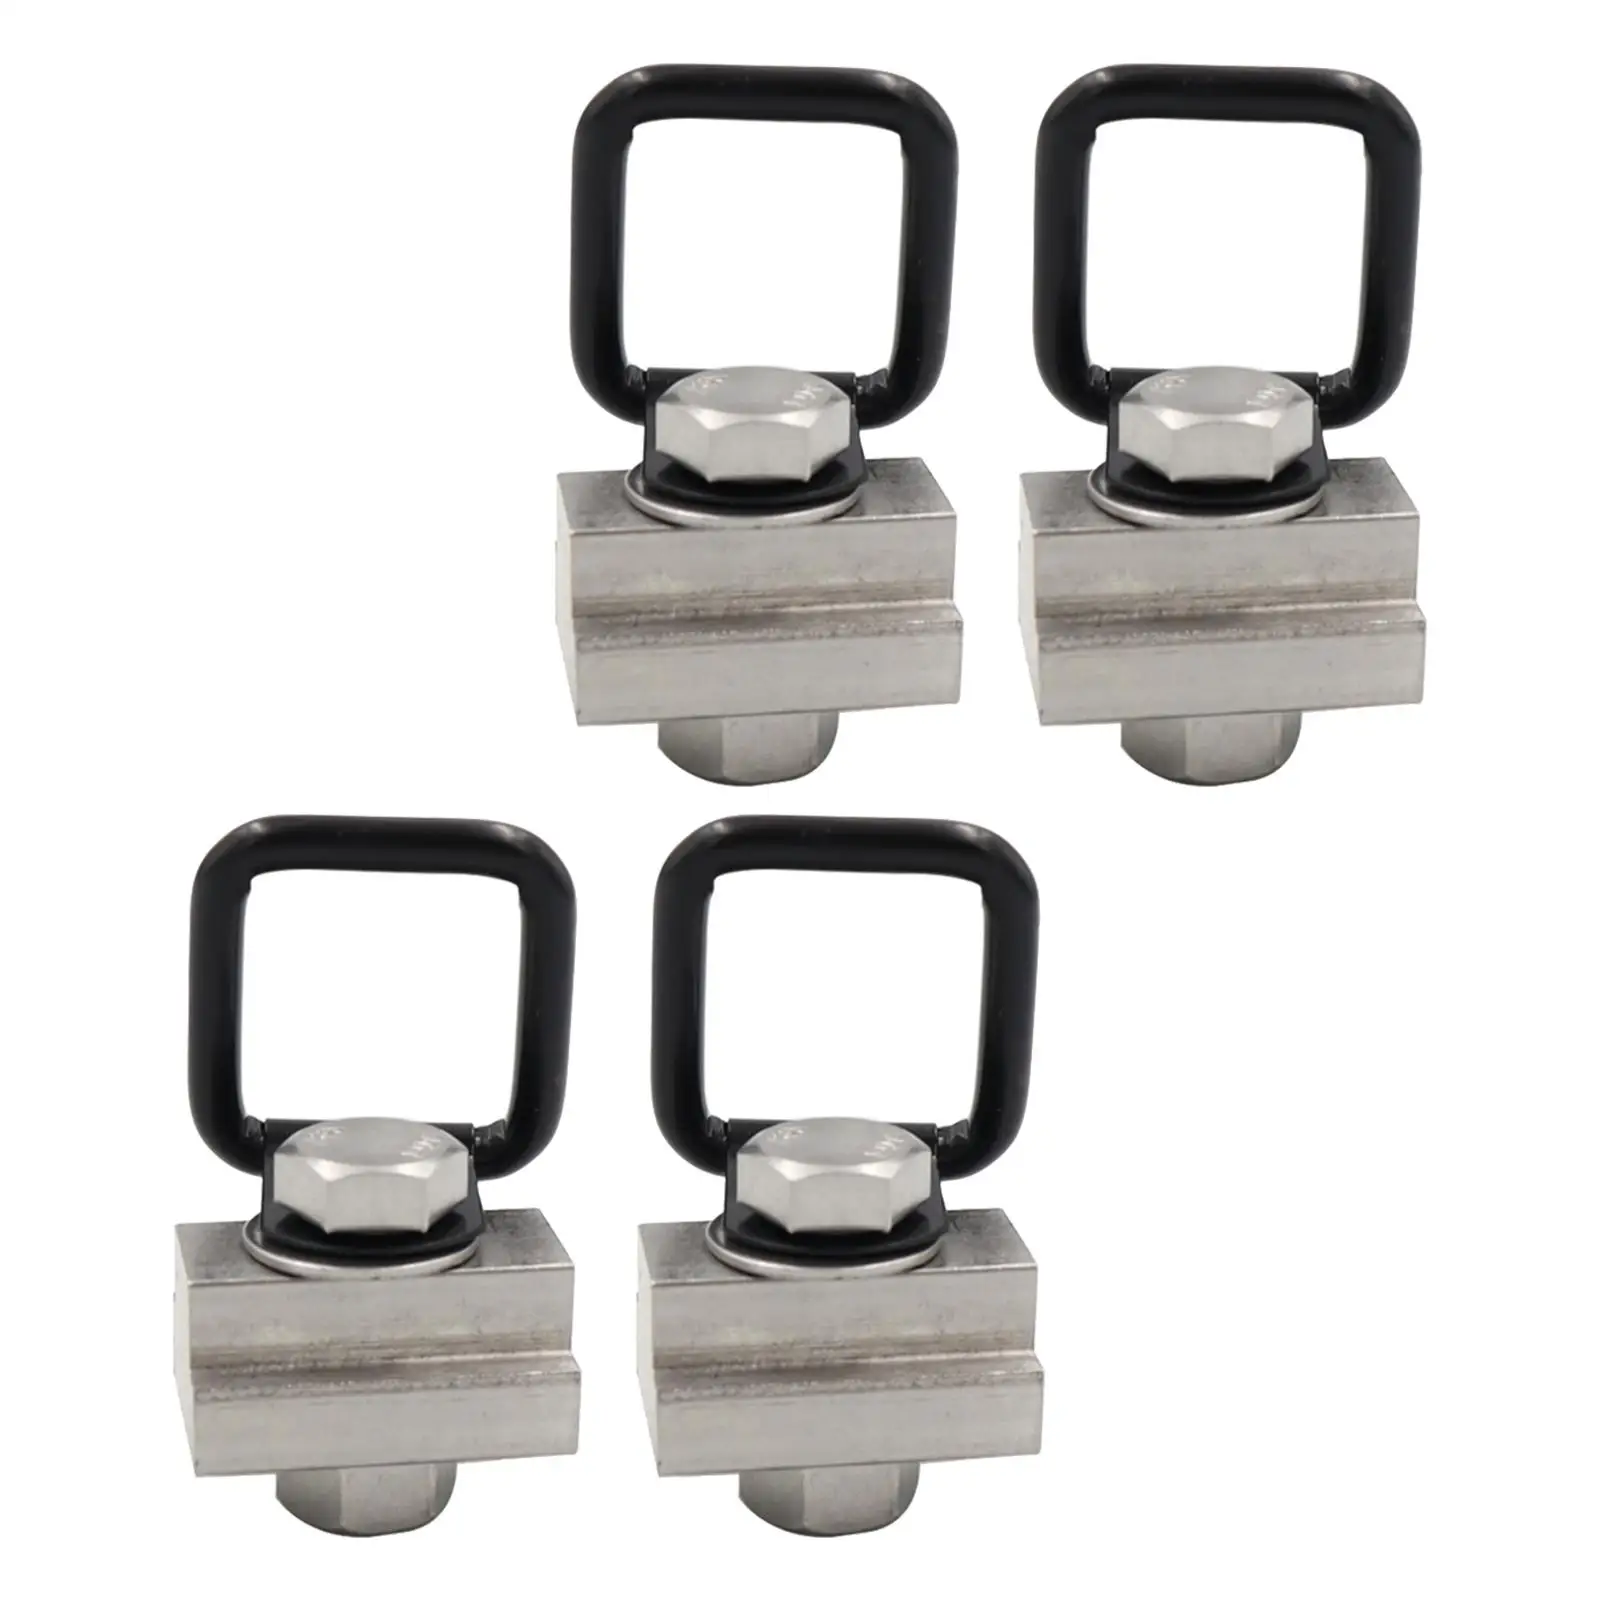 4x Bed Deck Rails Cleat T Slot Nuts Kit Replacement for Toyota for tundra